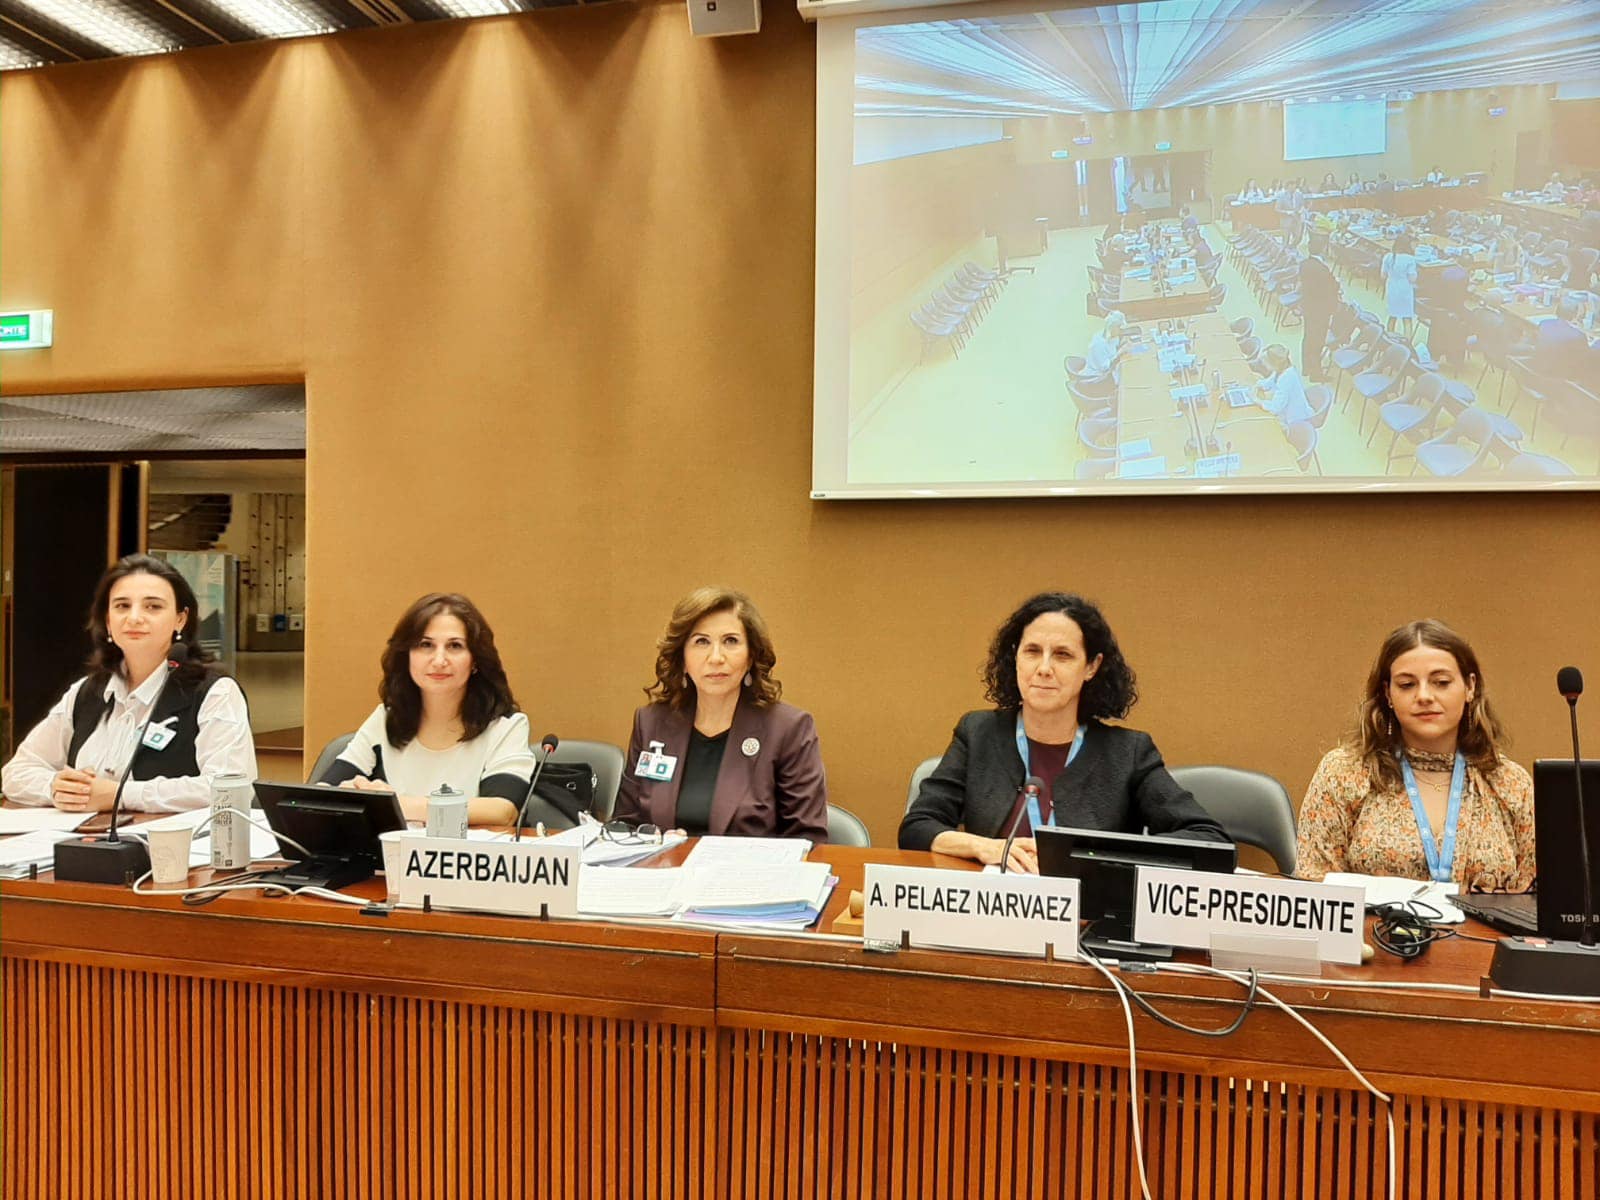 The sixth periodic report on the Convention was presented at the 82nd session of the UN Committee on the Elimination of Discrimination against Women